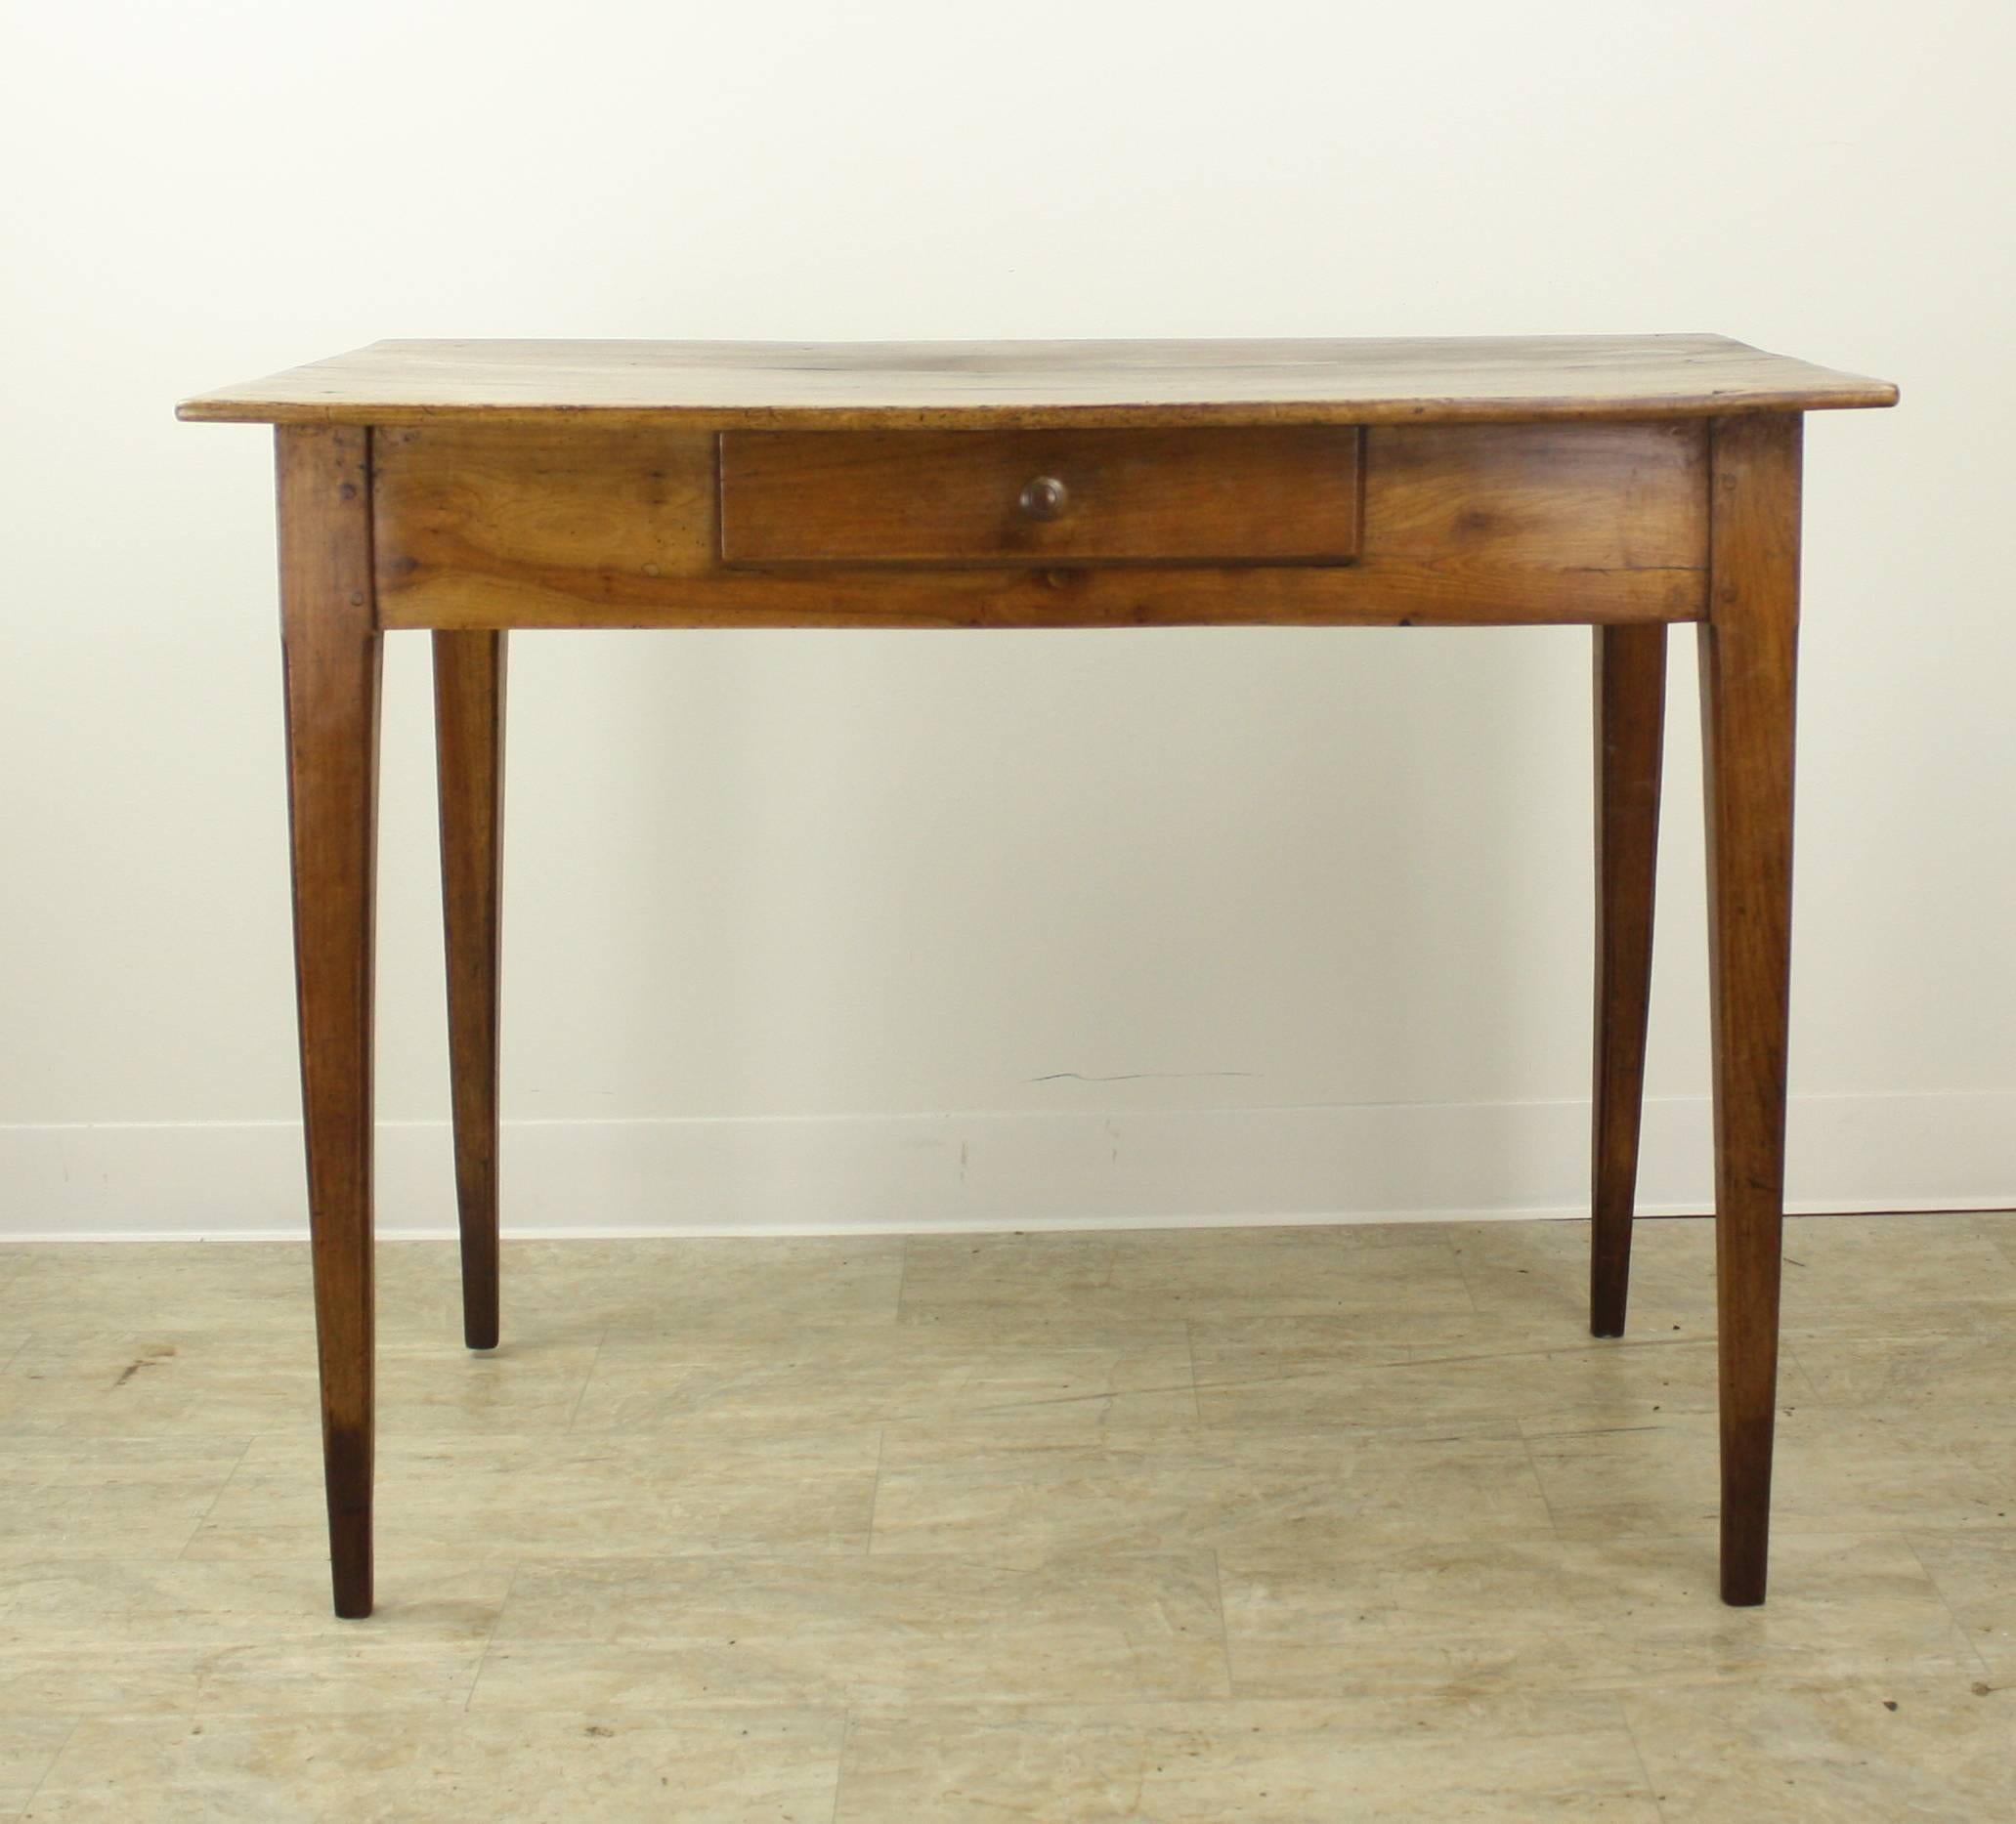 A very nice desk, over 3 feet in width, standard height, with an excellent apron height very comfortable at 25". Great walnut grain and color, with some interesting old distress on the top. Lovely French tapered legs, one small drawer in the